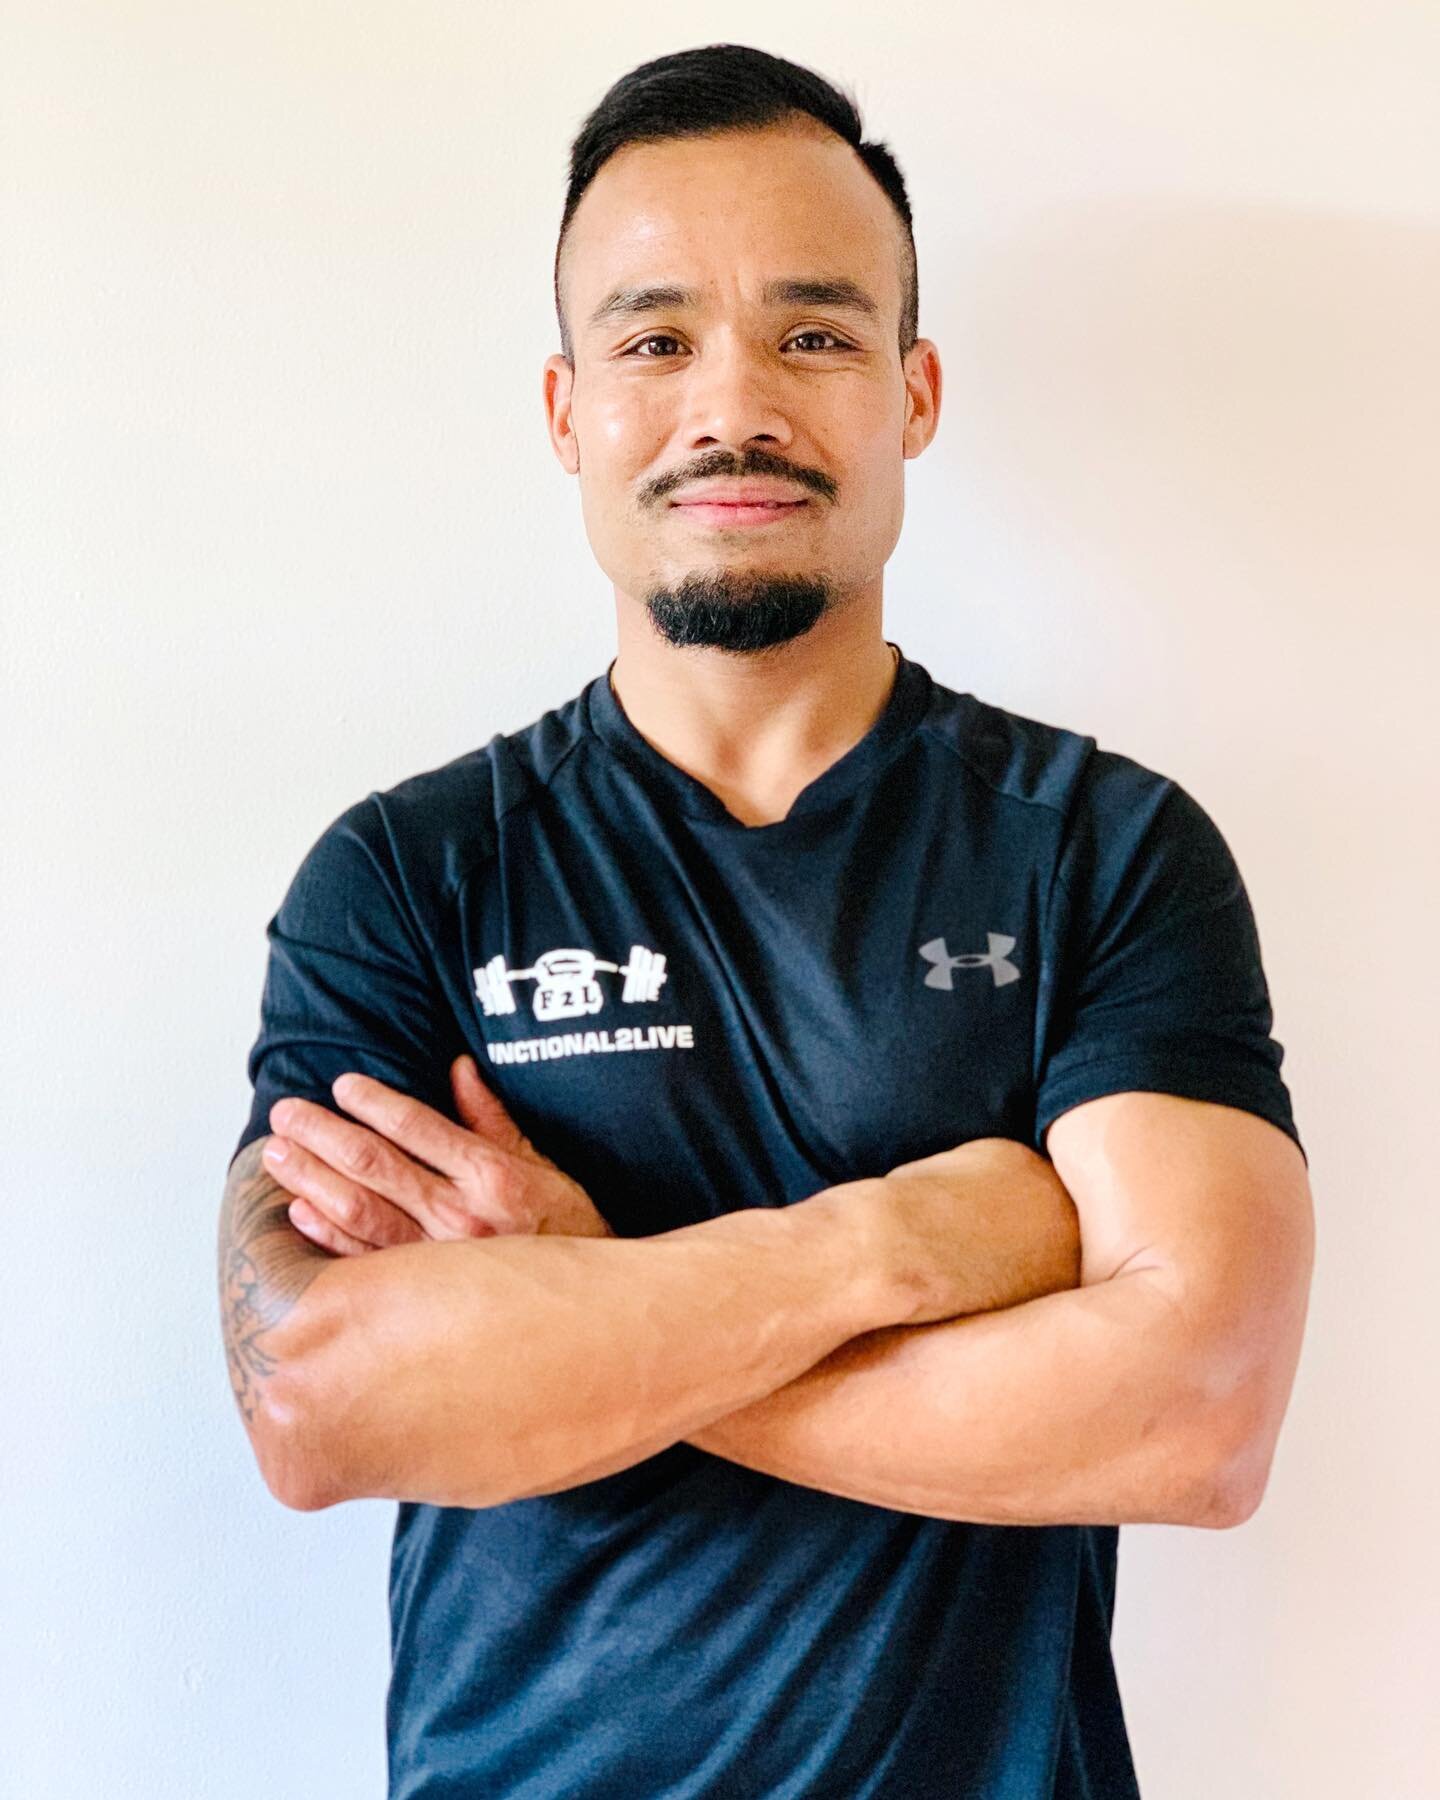 We would like to welcome our new group Trainer in our team @suanmaharjan 
He is certified group instructor.
Sujan is very passionate about helping others to achieve their health &amp; fitness goal. 
We are excited to have him on board and he is very 